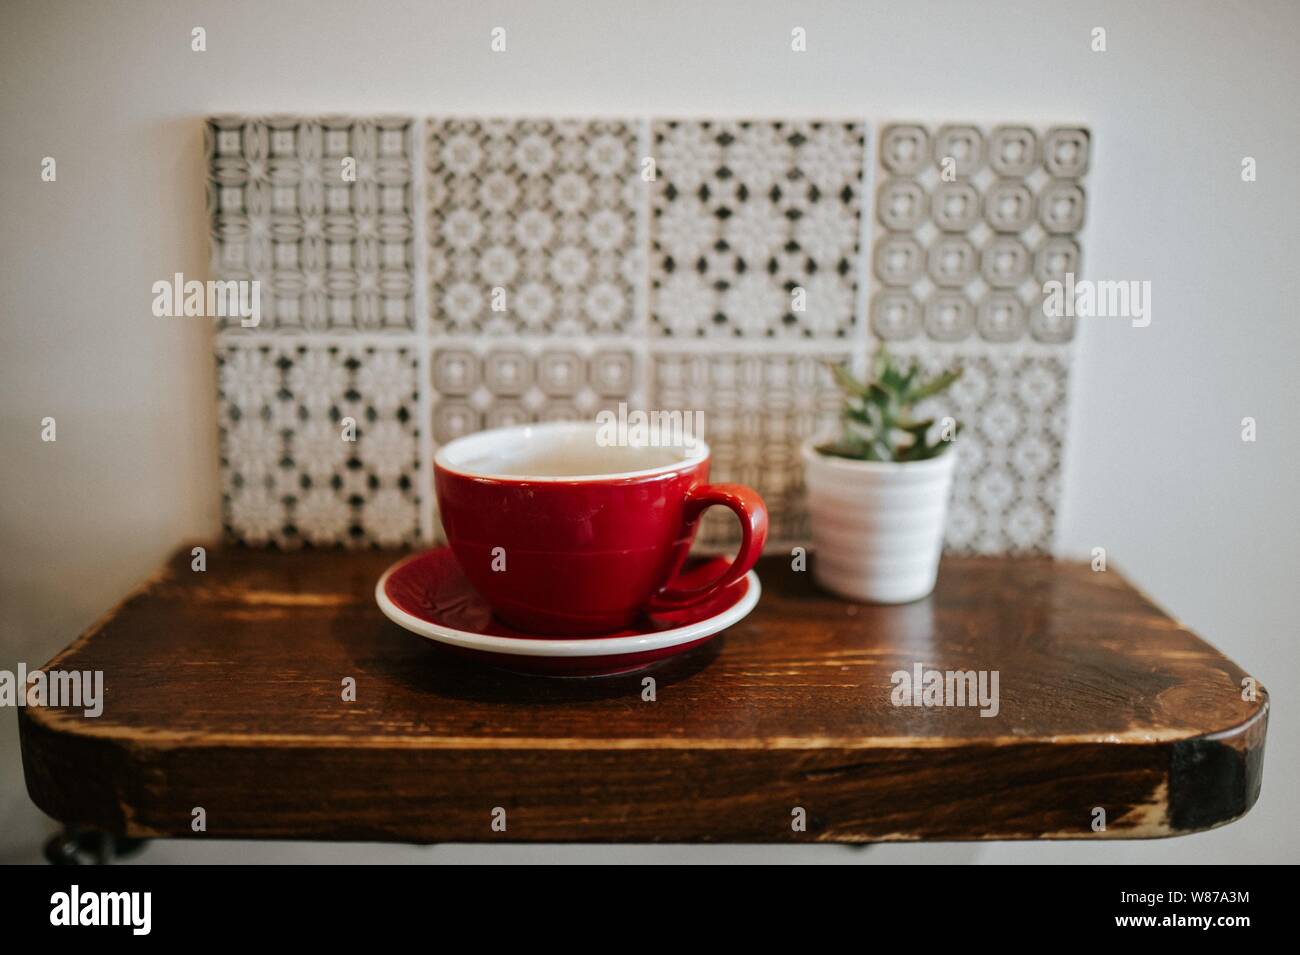 Closeup shot of a red ceramic cup and a flower pot on a small wooden surface Stock Photo